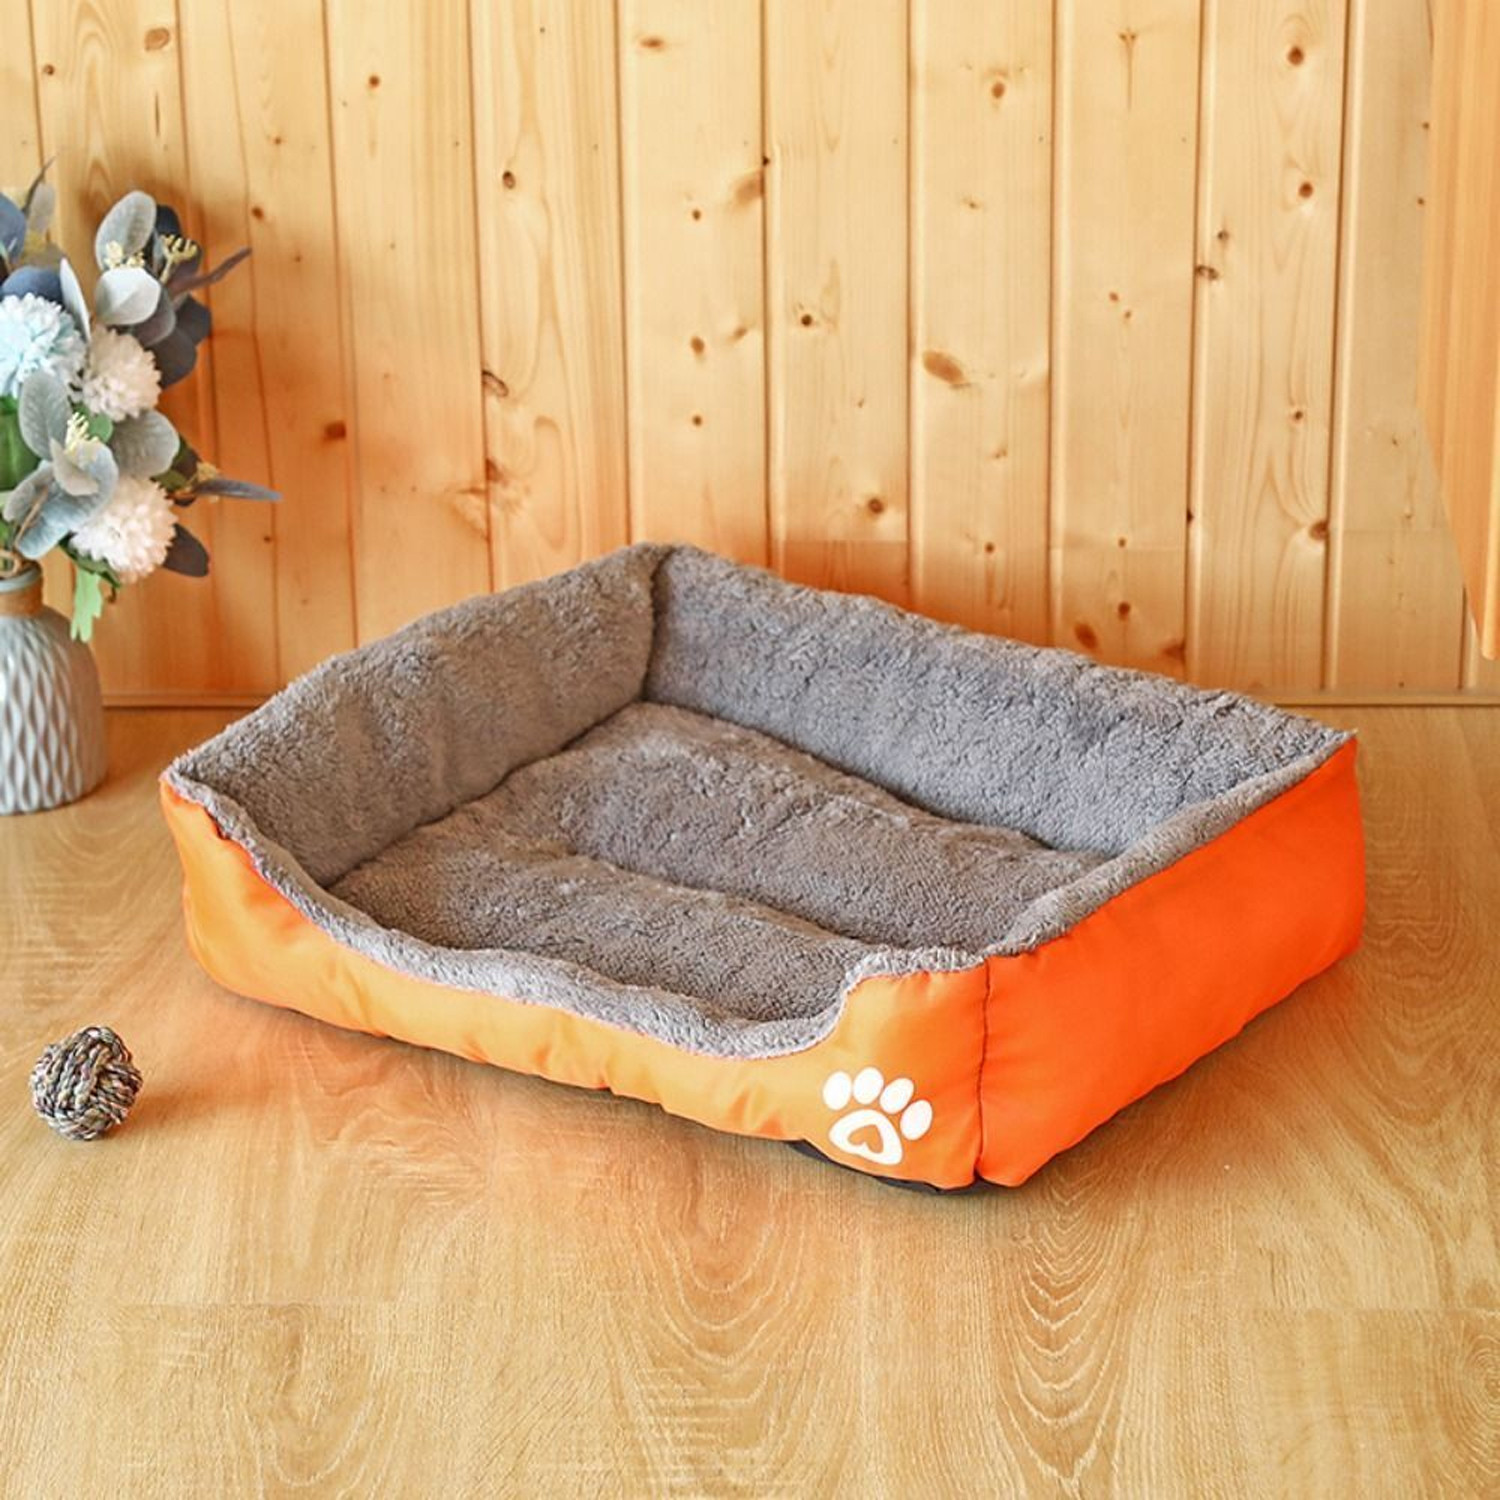 Kuber Industries Dog & Cat Bed|Super Soft Plush Top Pet Bed|Oxford Cloth Polyester Filling|Machine Washable Dog Bed|Rectangular Cat Bed with Rise-Edge Pillow|QY036OR-L|Orange